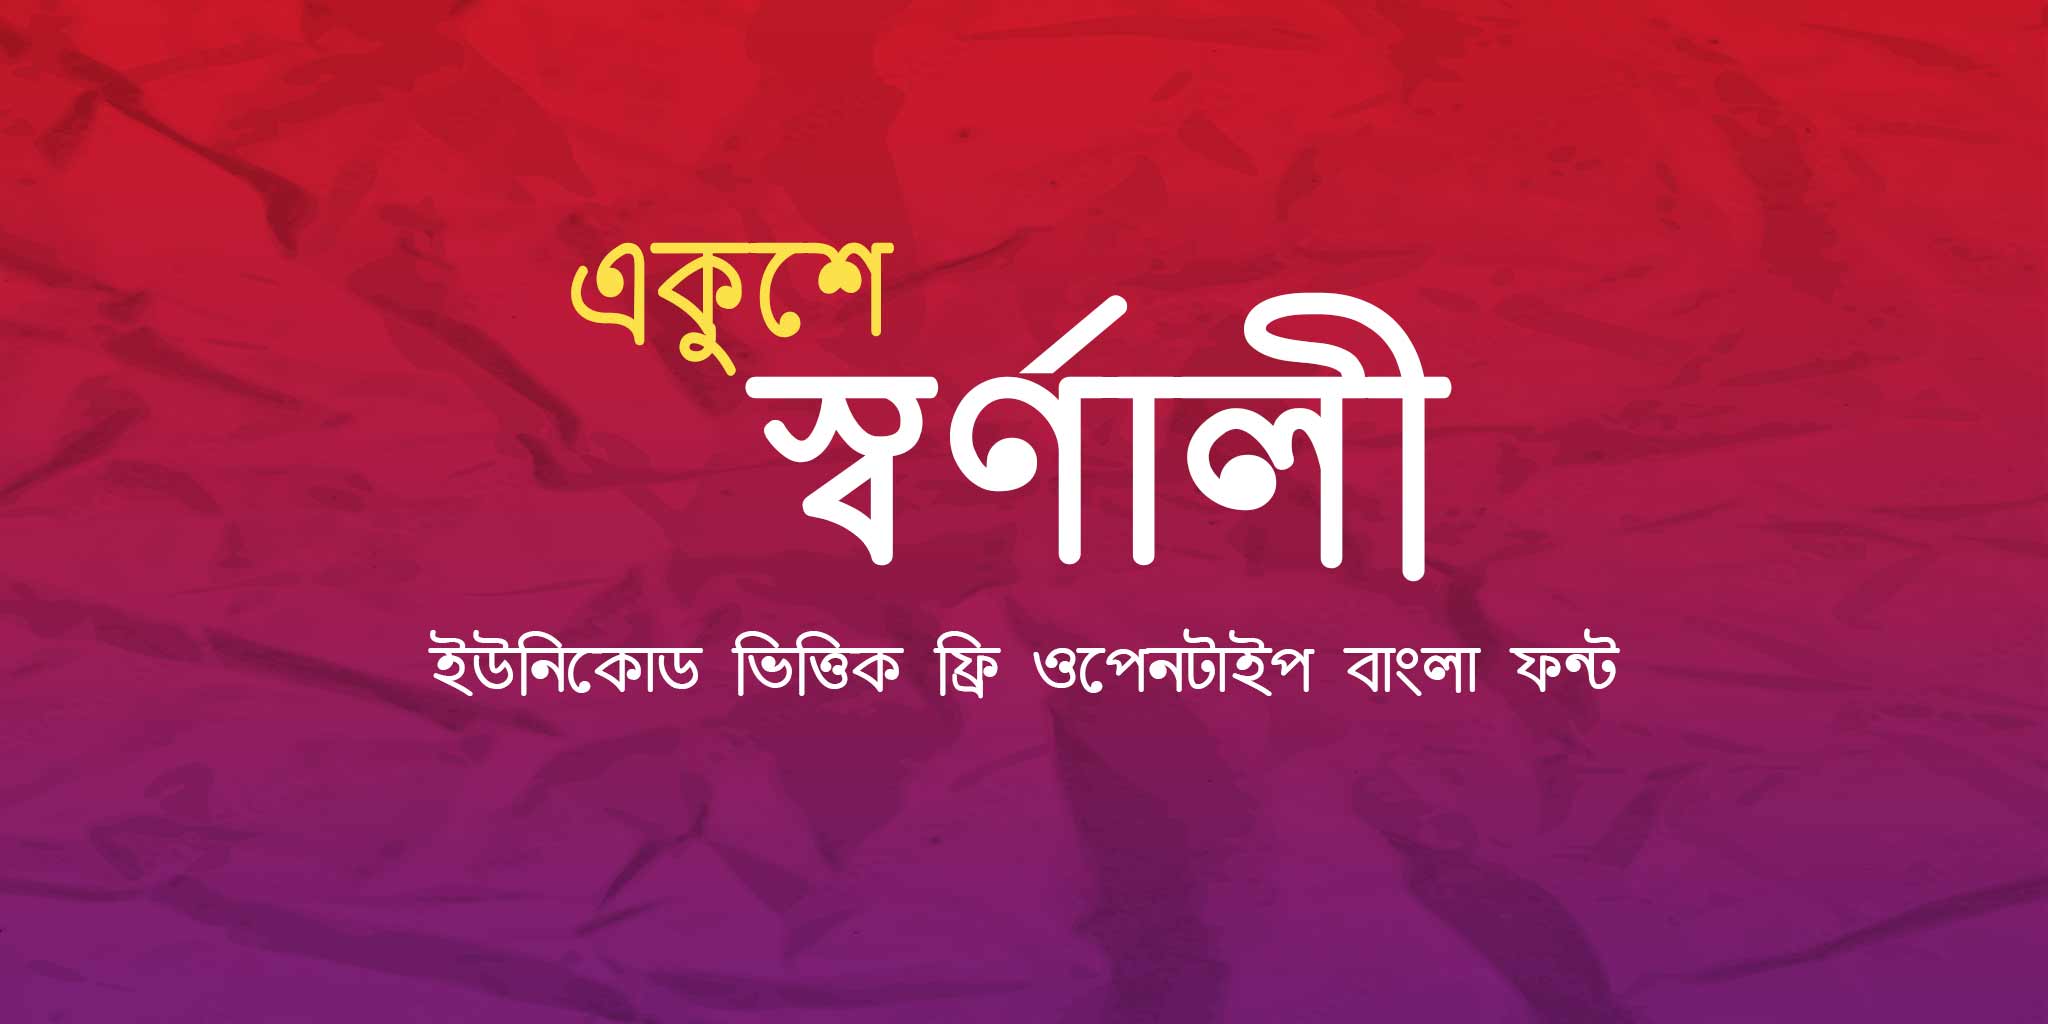 Sornaly-new-Bangla-unicode-font-open-for-you